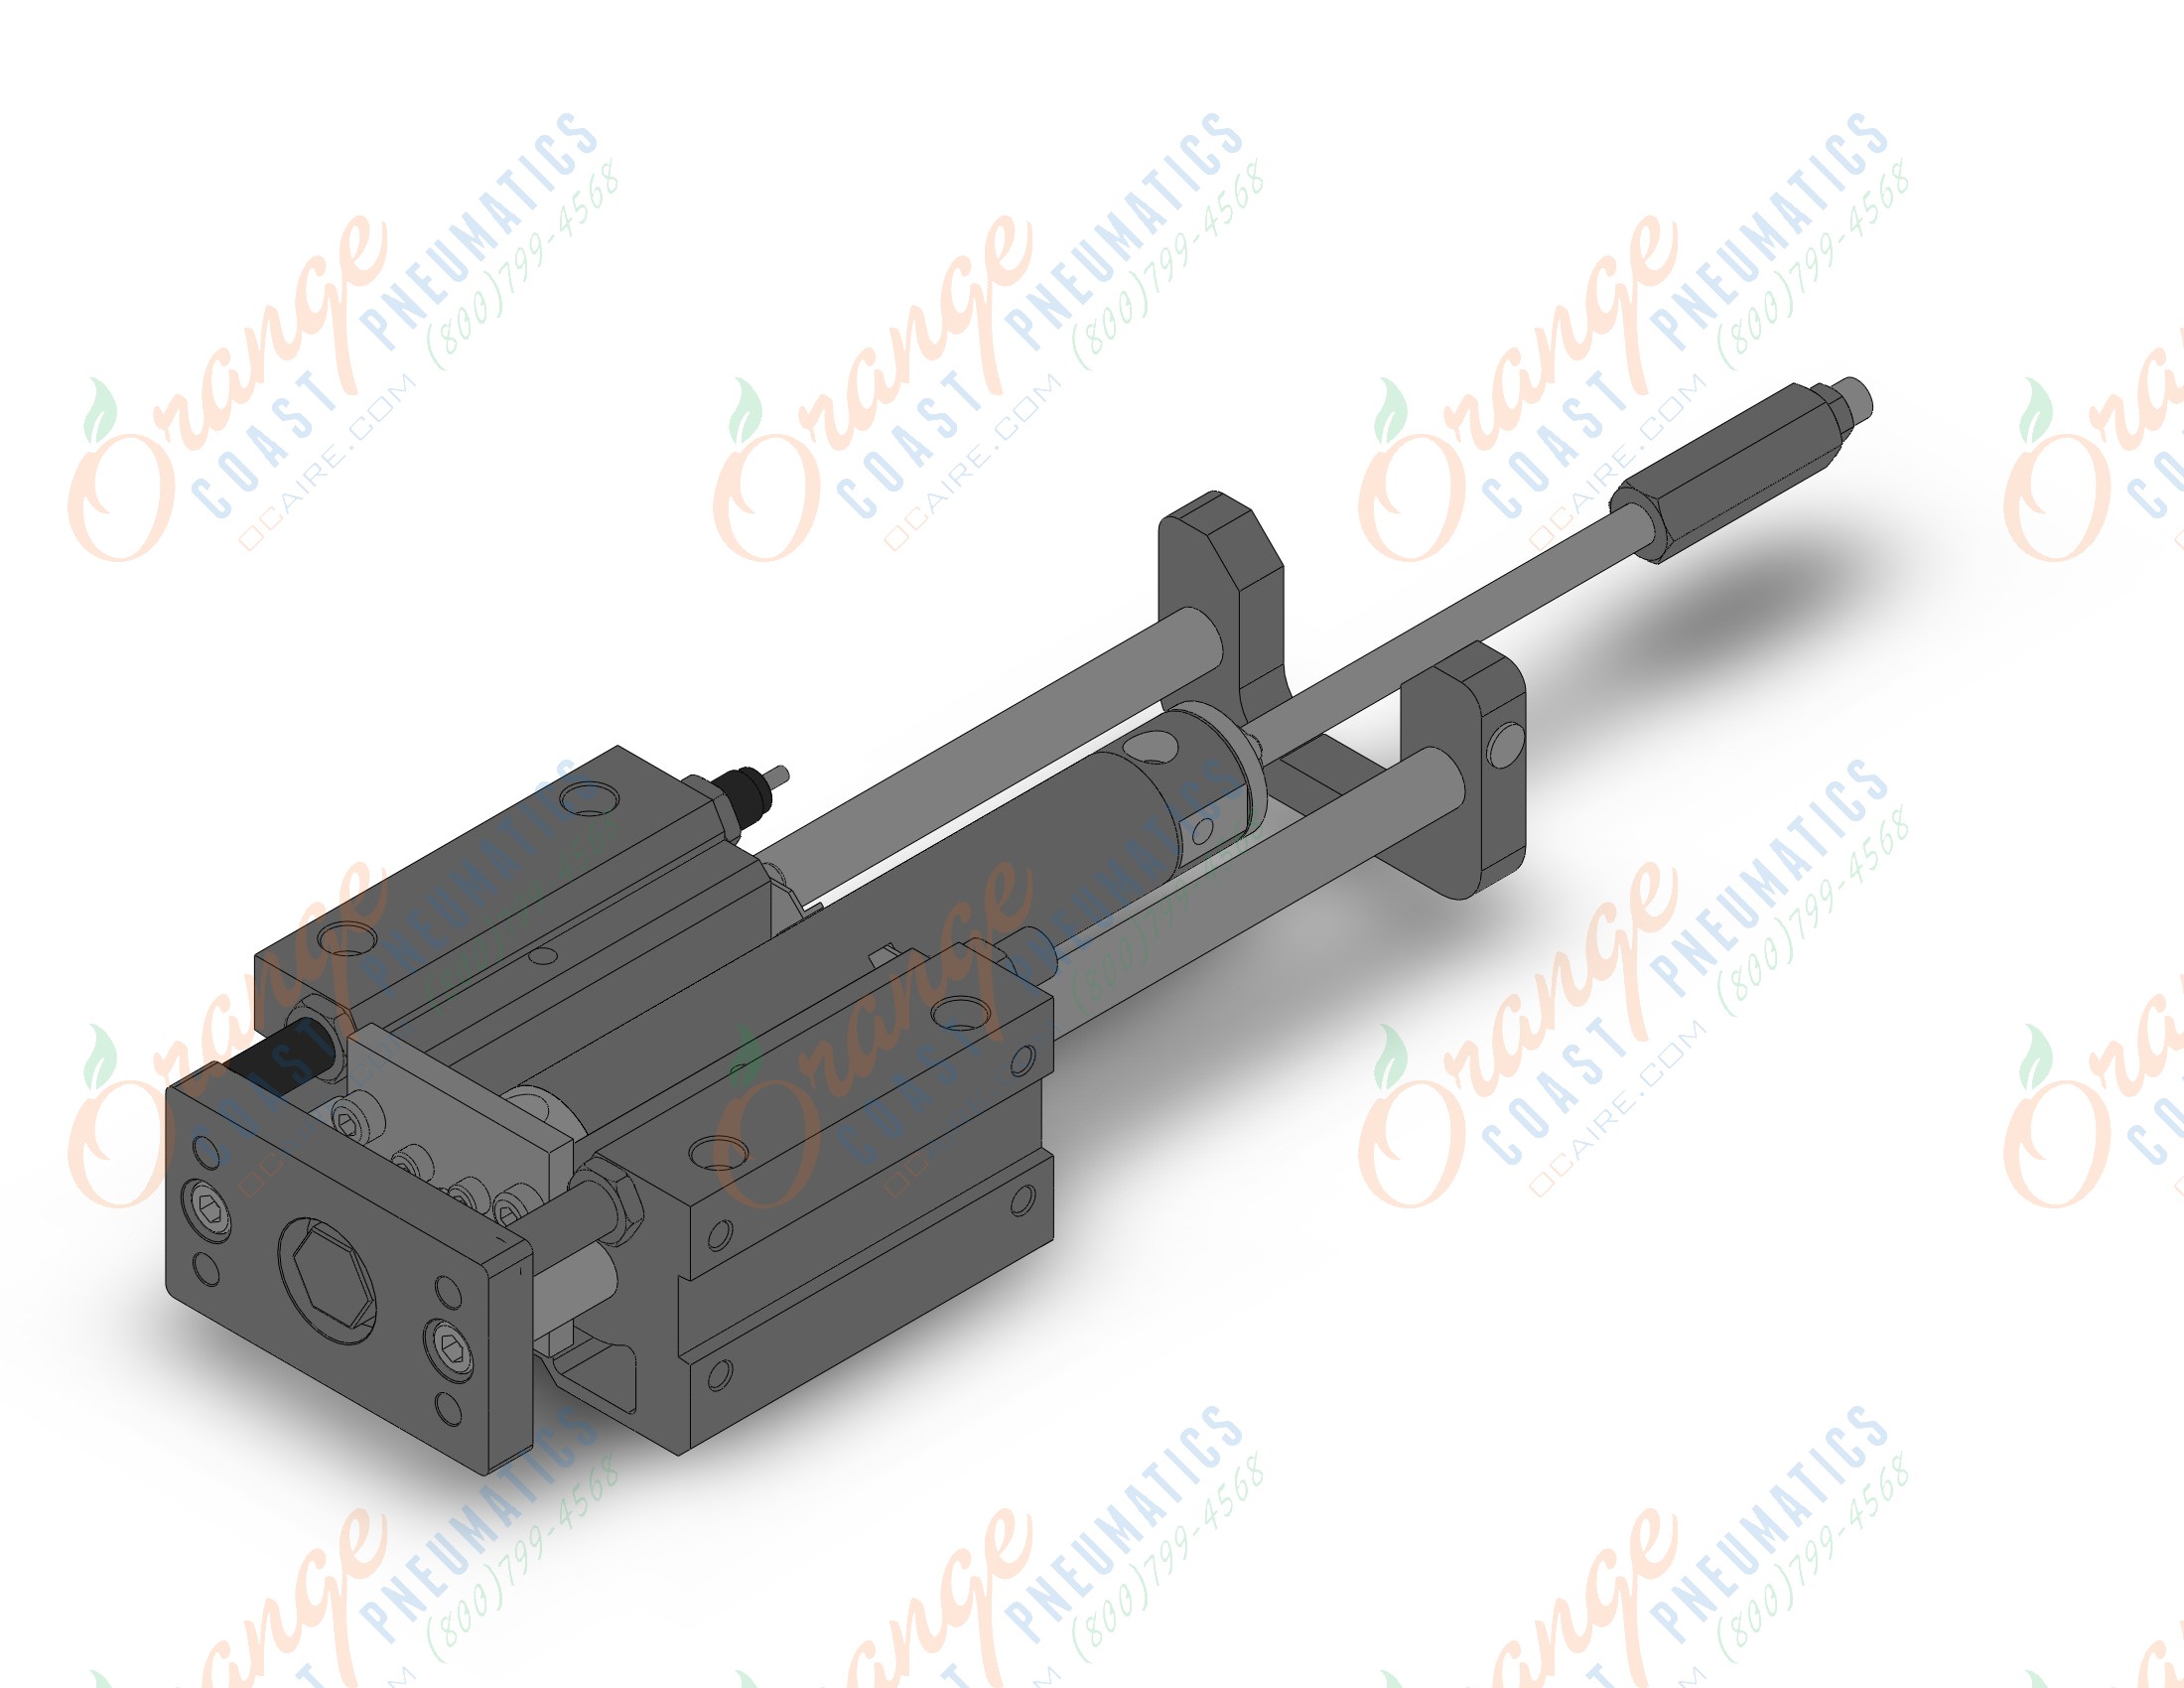 SMC MGGLB20-100A-XC8 mgg, guide cylinder, GUIDED CYLINDER